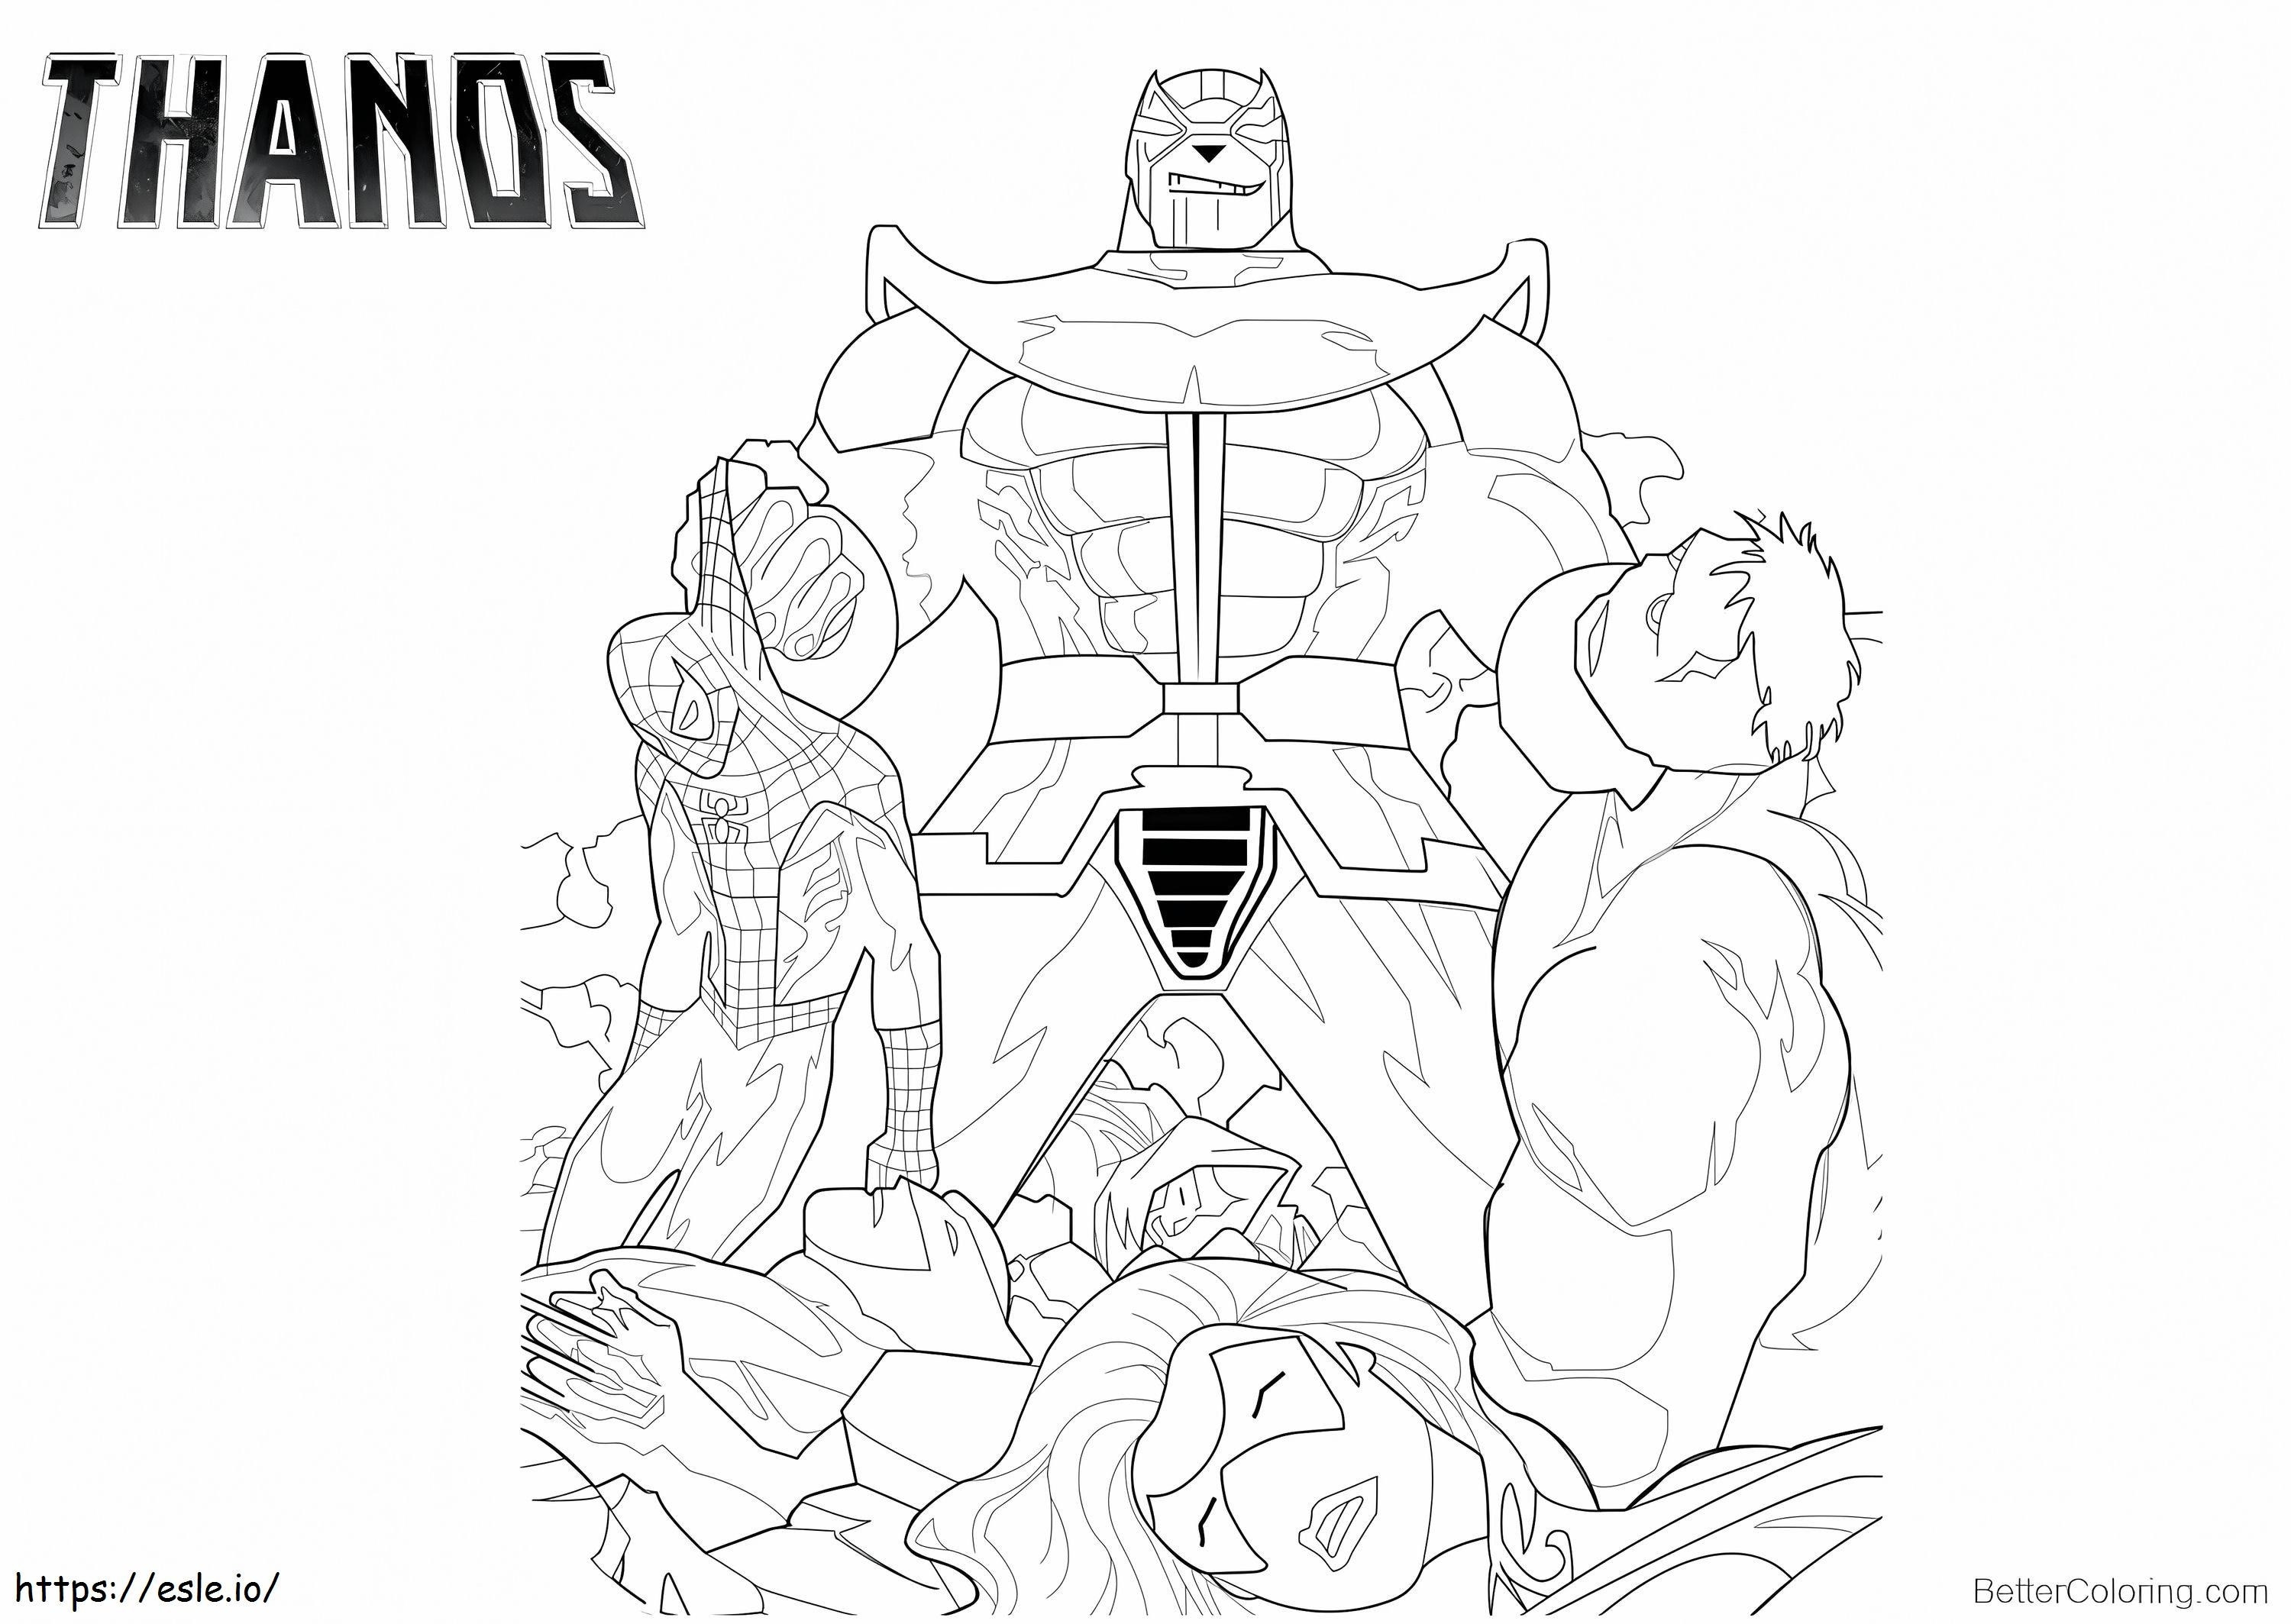 Thanos With Marvel Characters coloring page